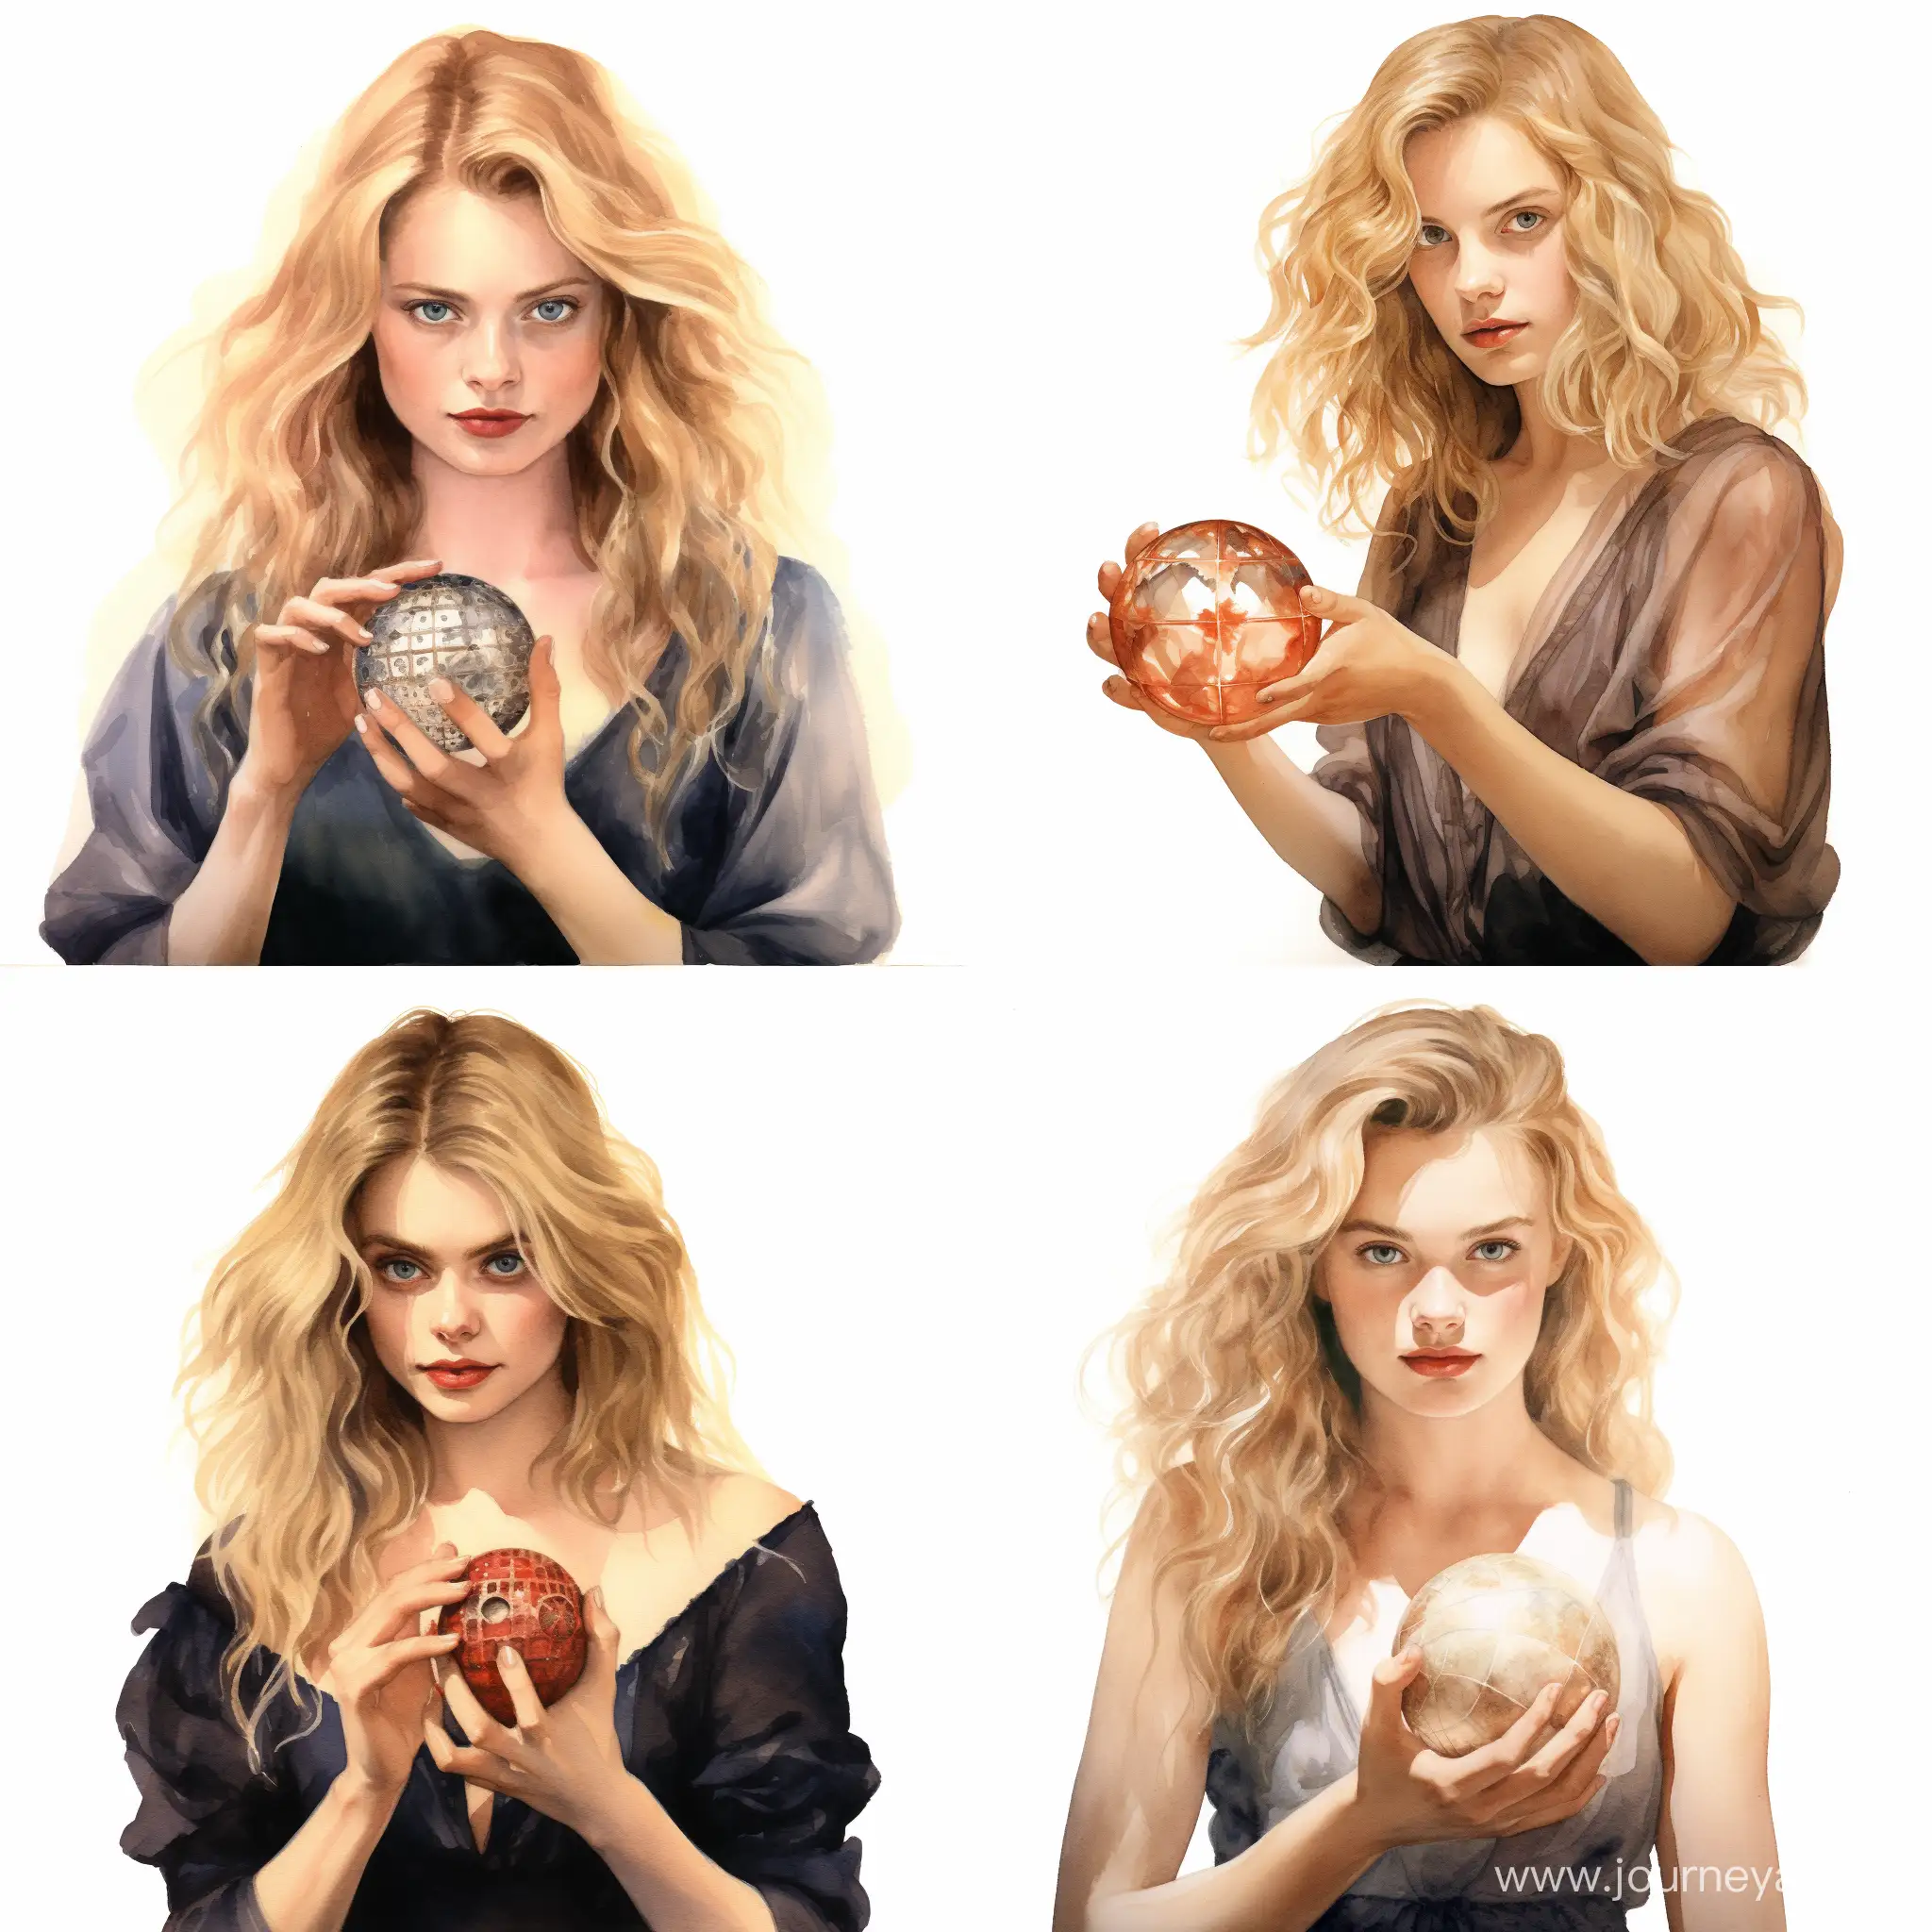 Young women, blond hair, holding a magic ball, watercolor